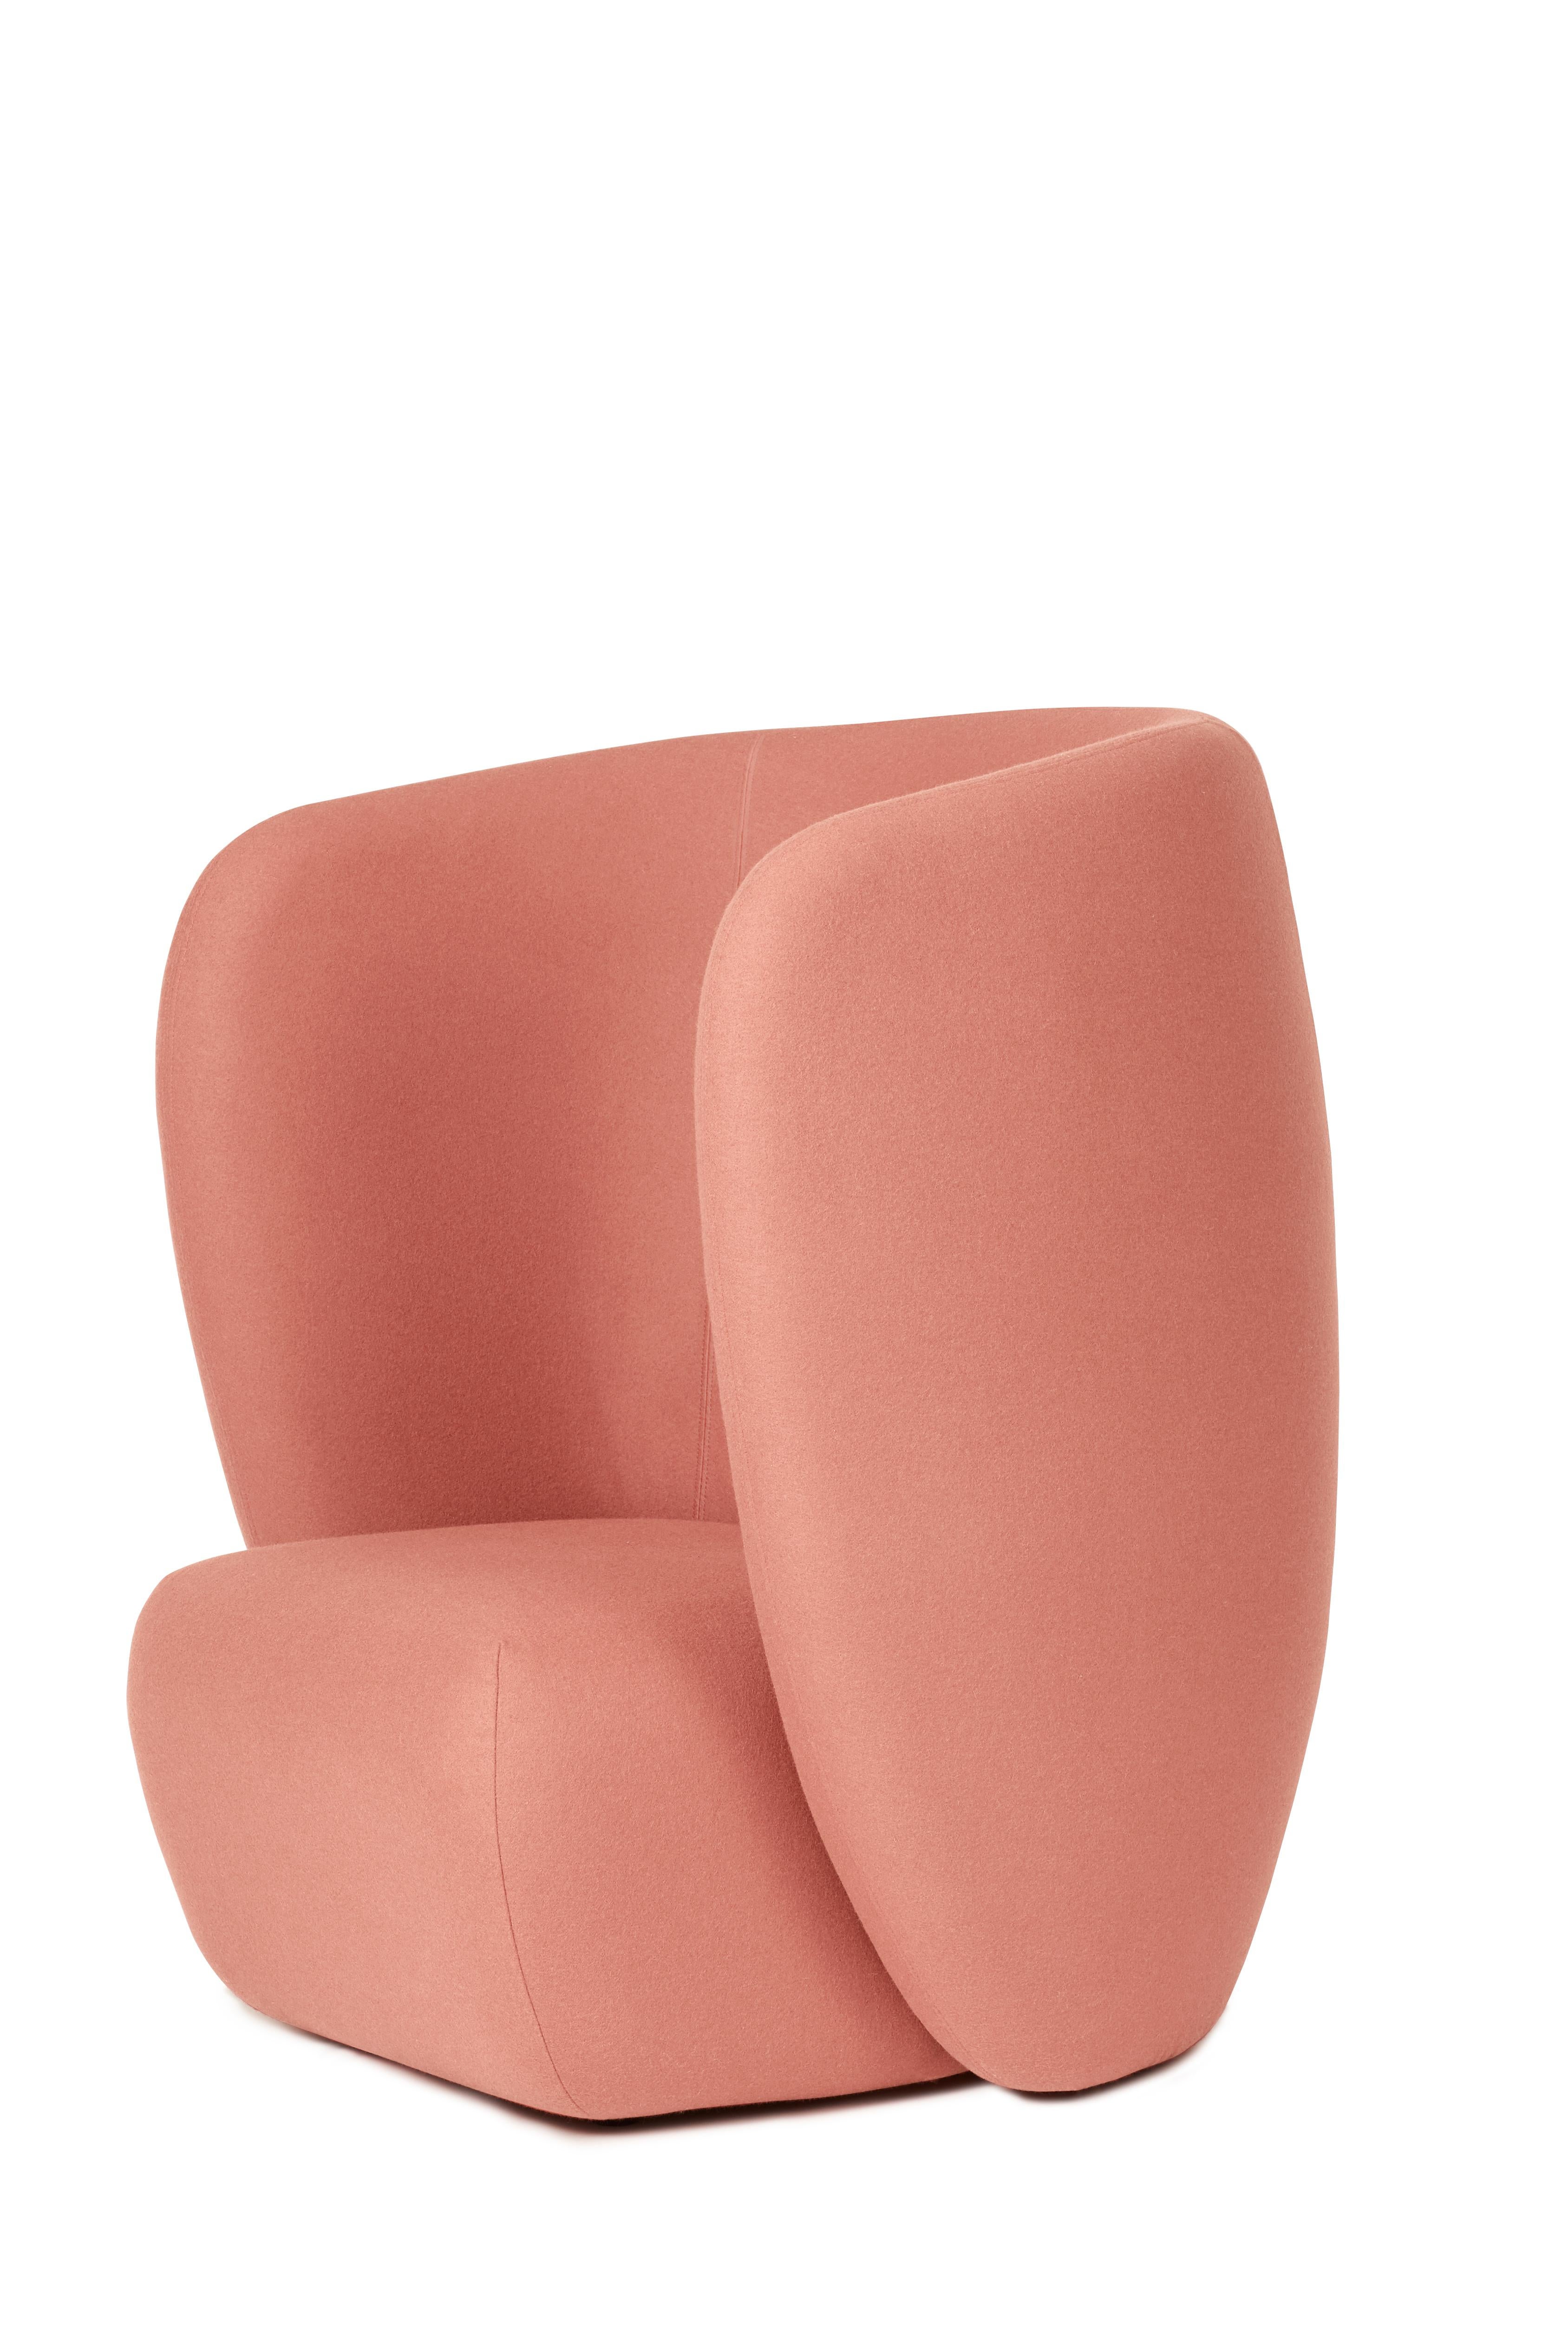 For Sale: Pink (Hero 511) Haven Lounge Chair, by Charlotte Høncke from Warm Nordic 2